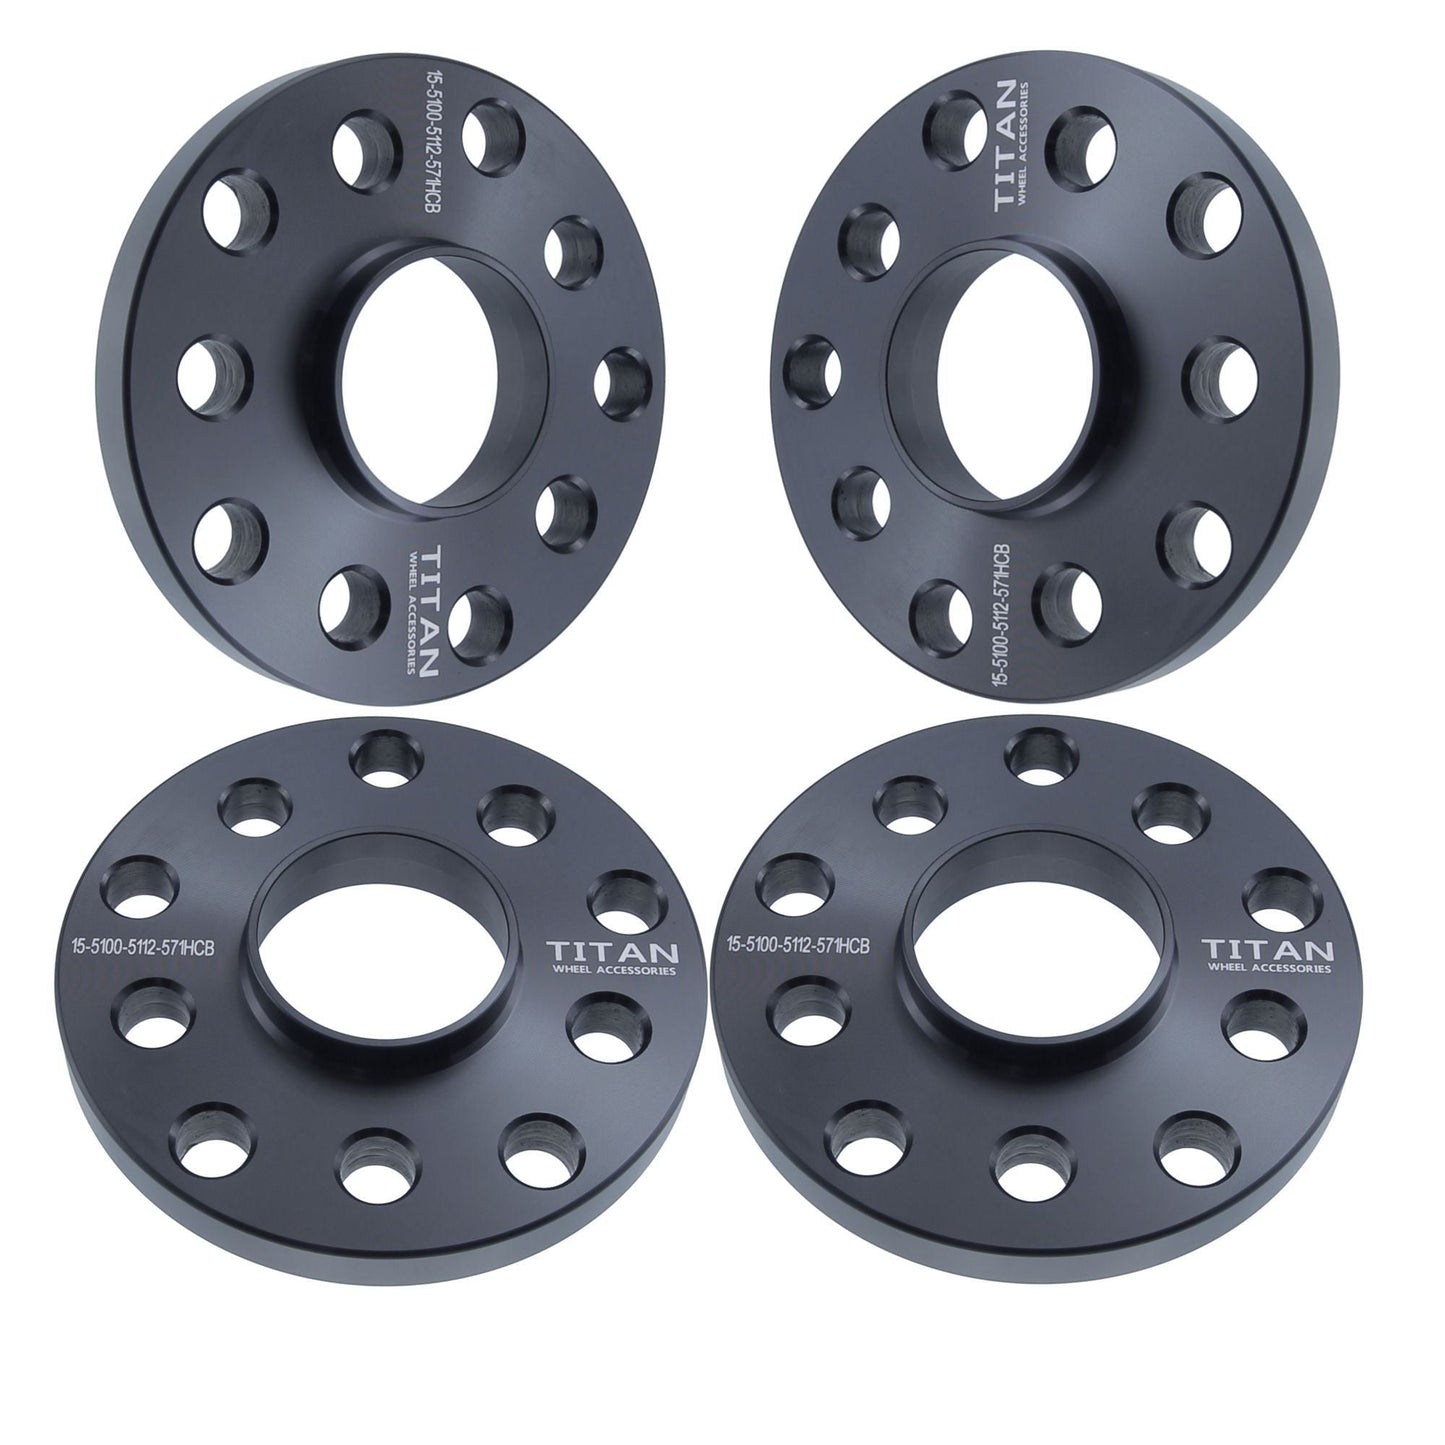 15mm Titan Wheel Spacers for VW Audi 5 Lug | Dual Drilled 5x100 and 5x117 | 57.1 Hubcentric | Set of 4 | Titan Wheel Accessories